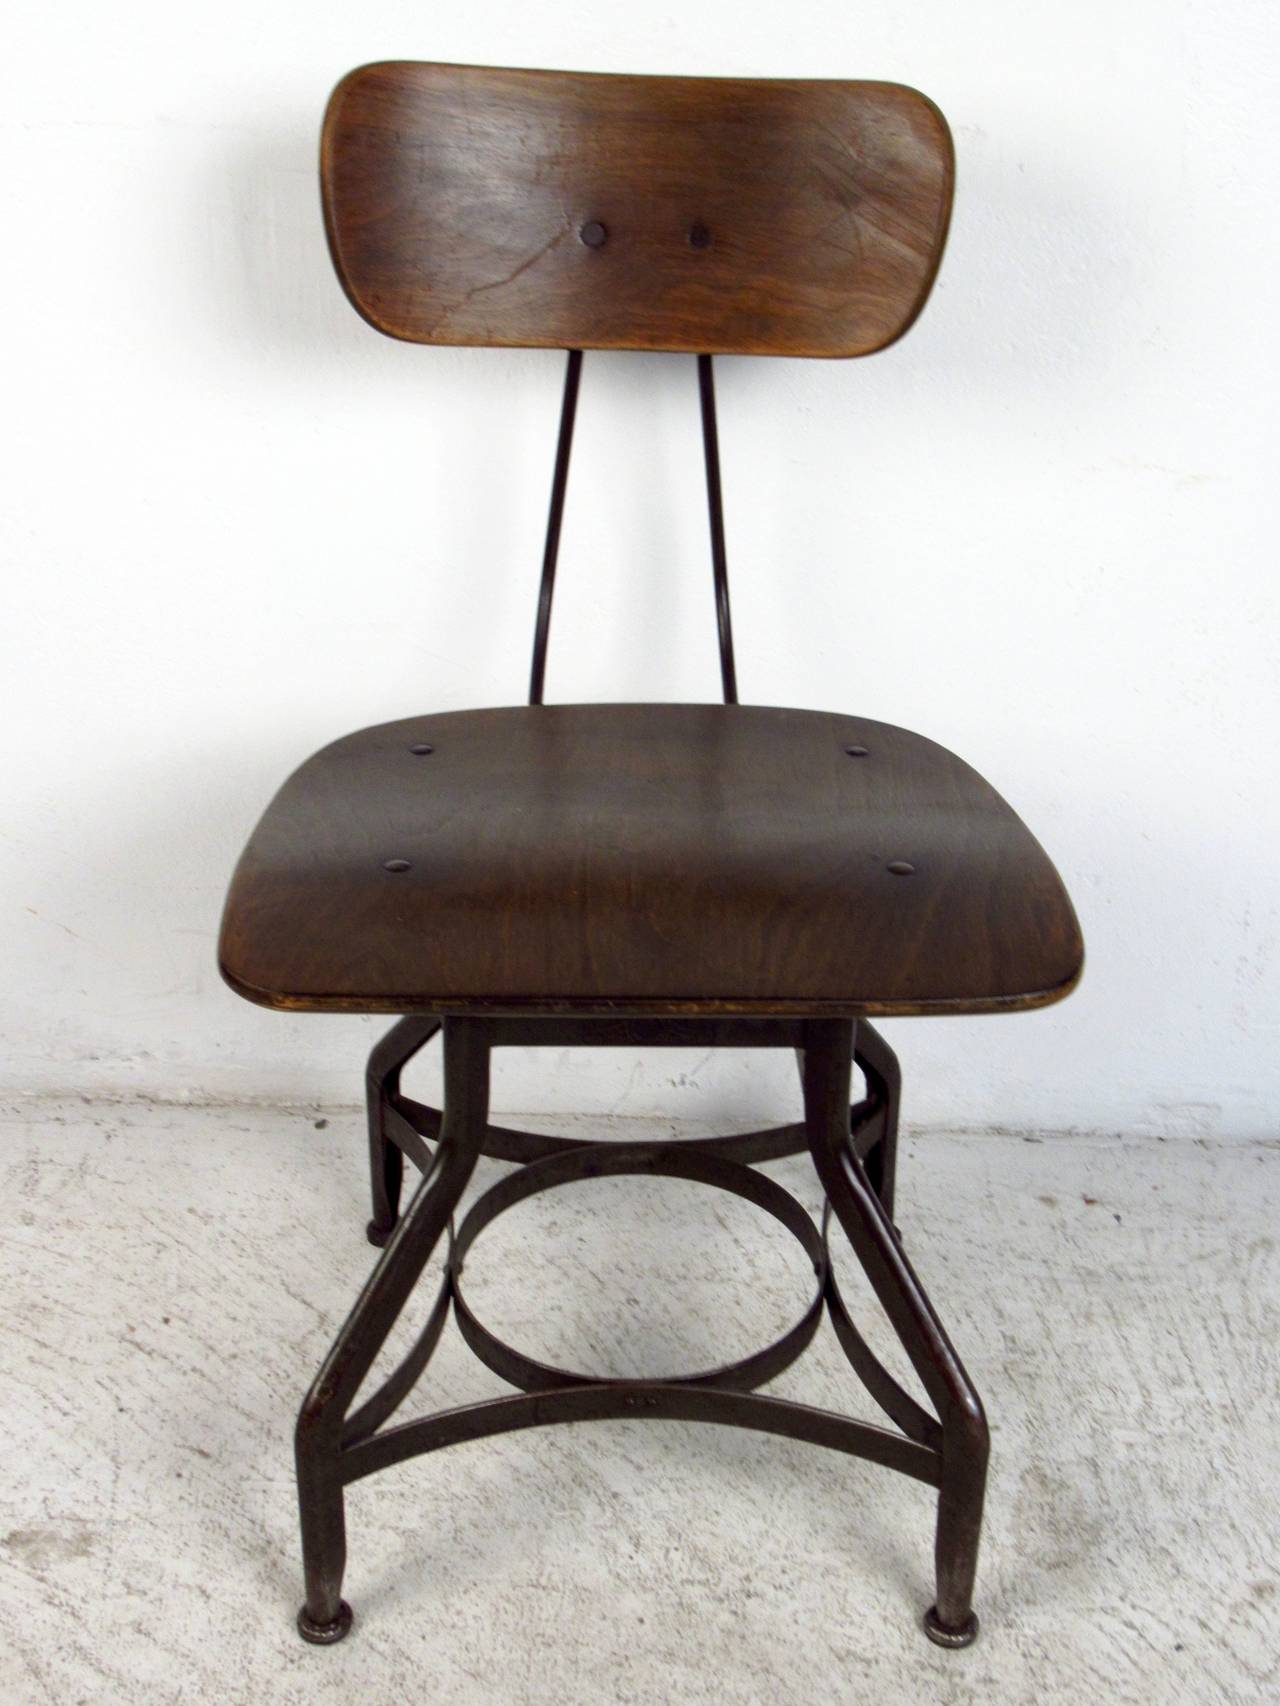 This depression era industrial stool by Toledo Metal Furniture Company features a solid steel construction, bentwood back, and unique vintagae base which offers a distinct flare to any home or office.

Please confirm item location (NY or NJ) with